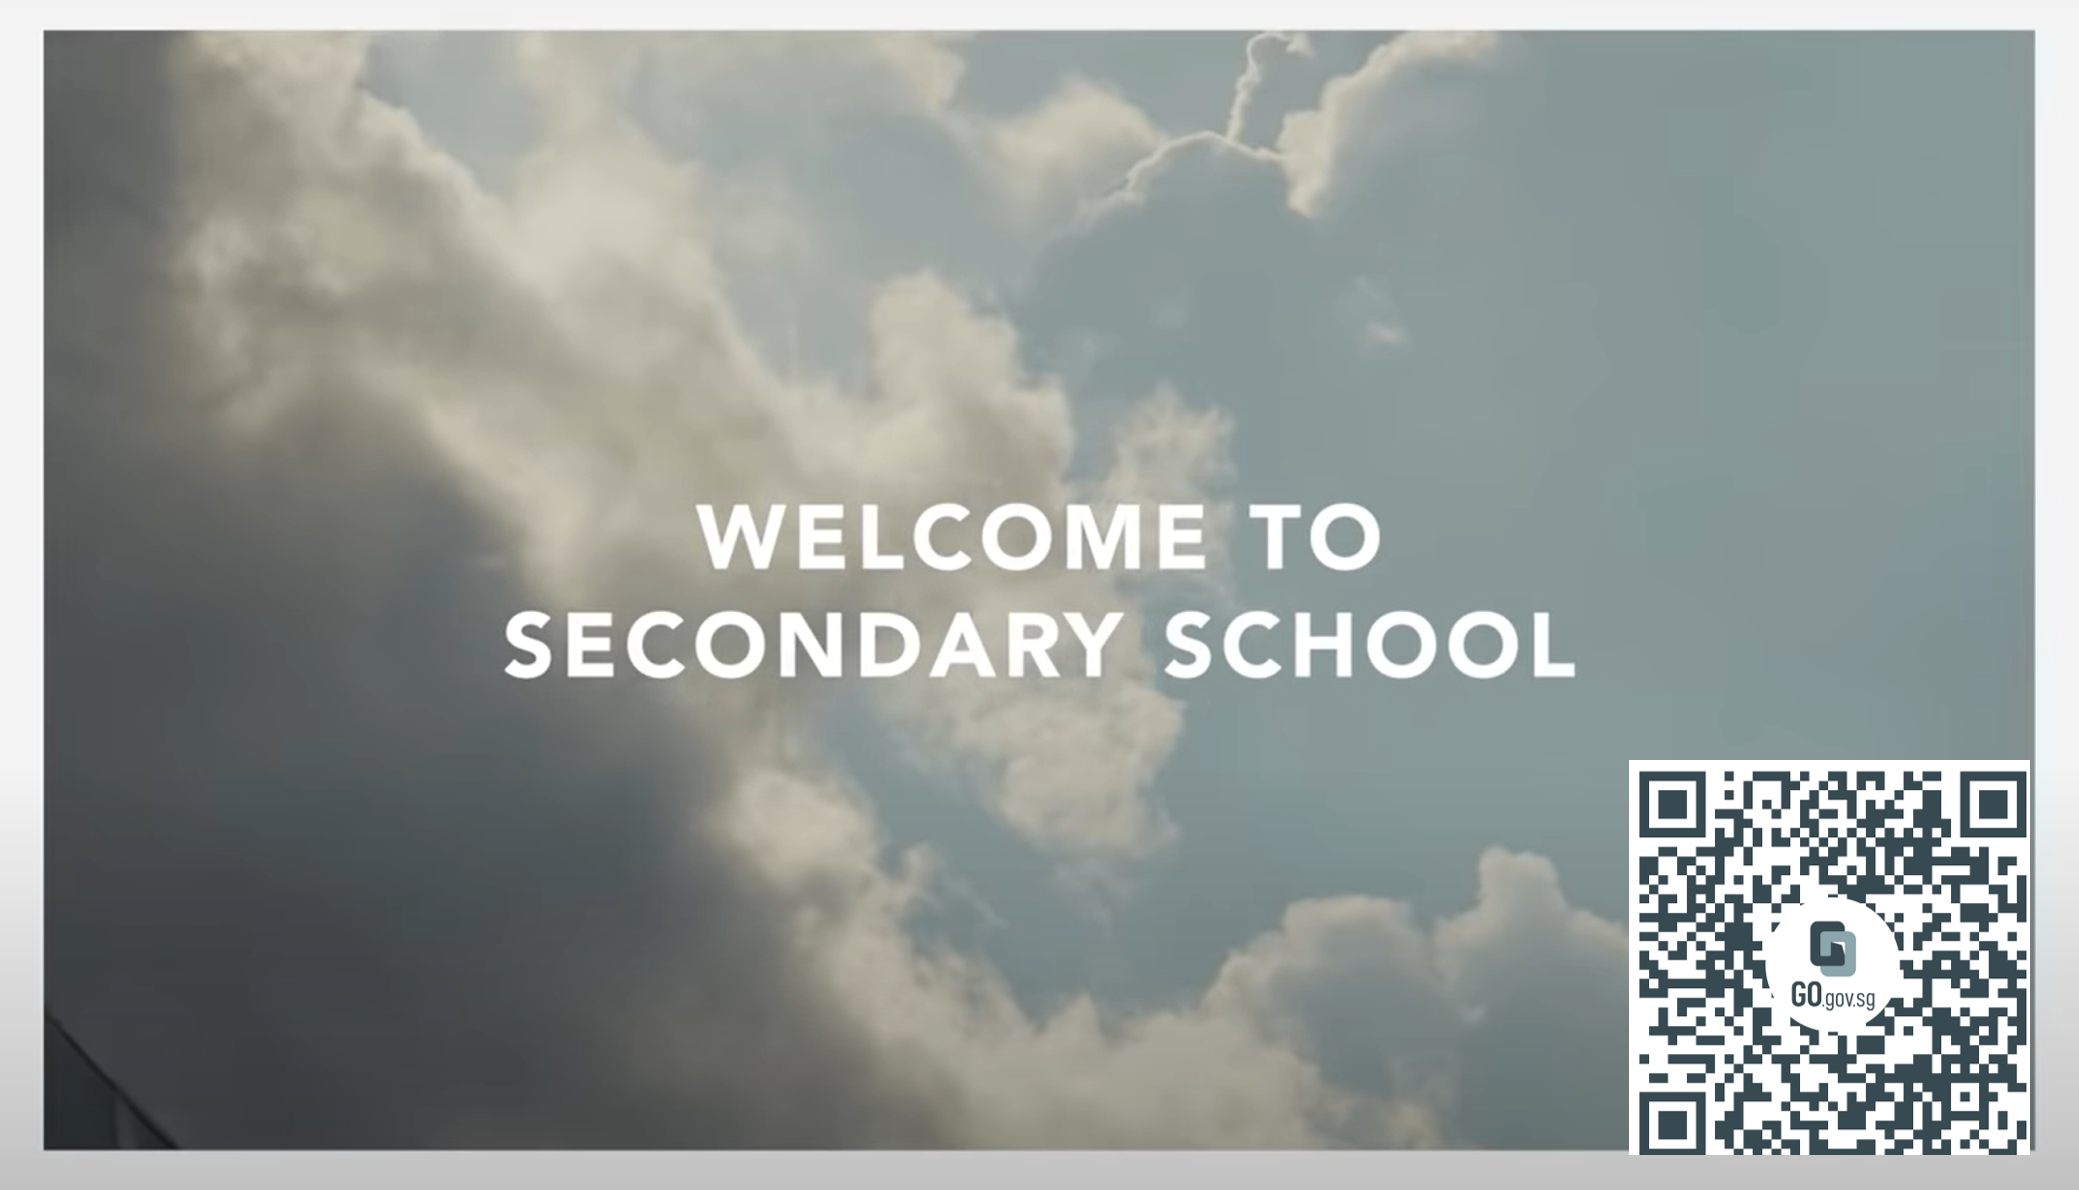 "Welcome to Secondary School" Video